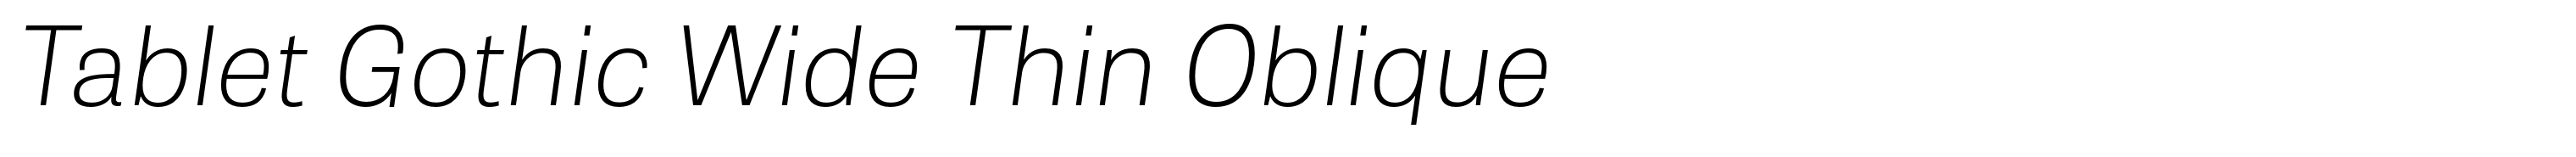 Tablet Gothic Wide Thin Oblique